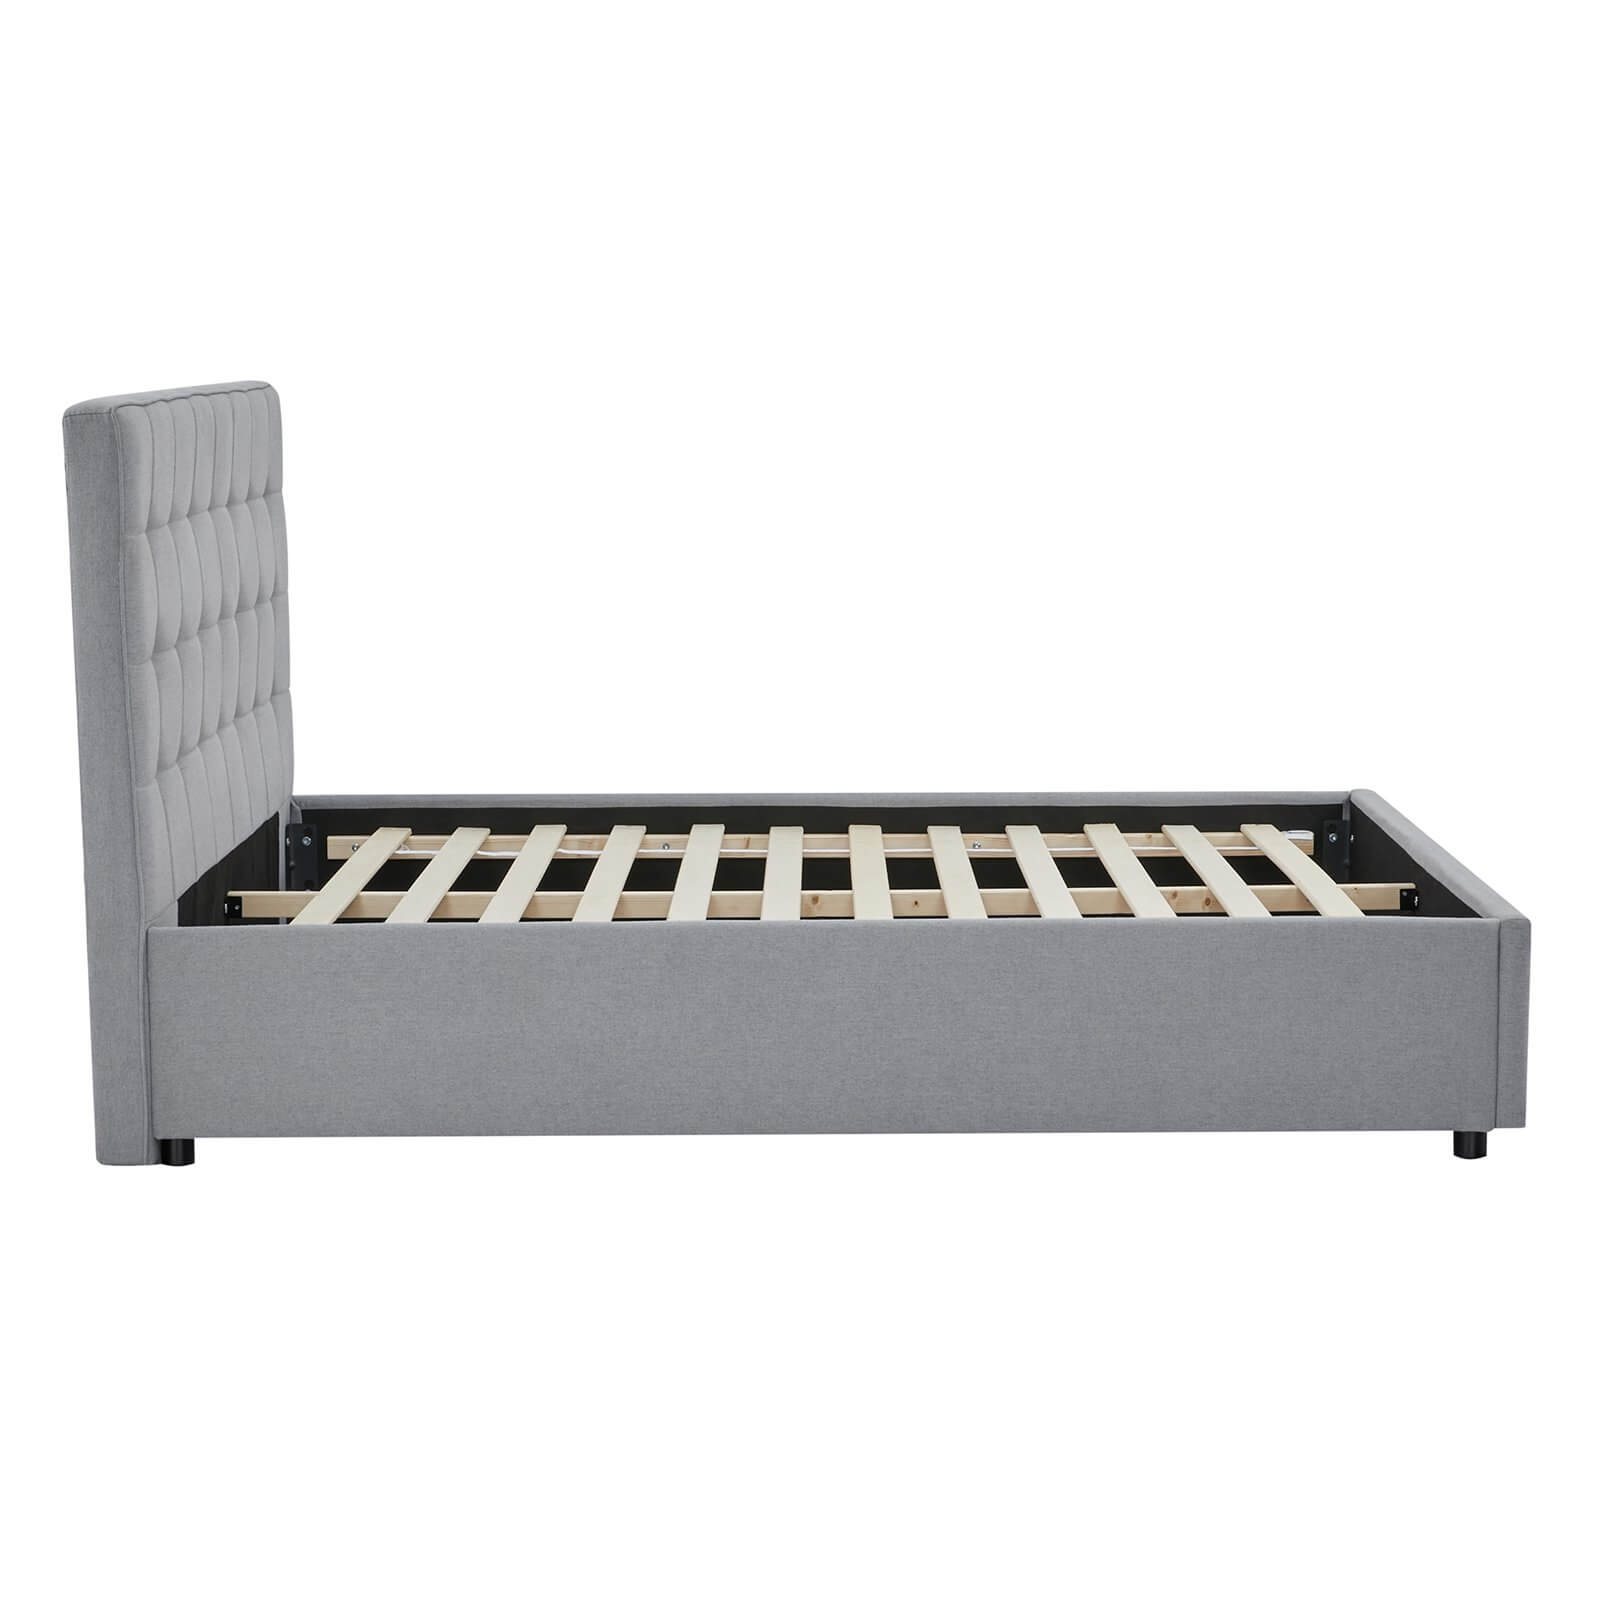 Hotel Upholstered Double Bed Frame